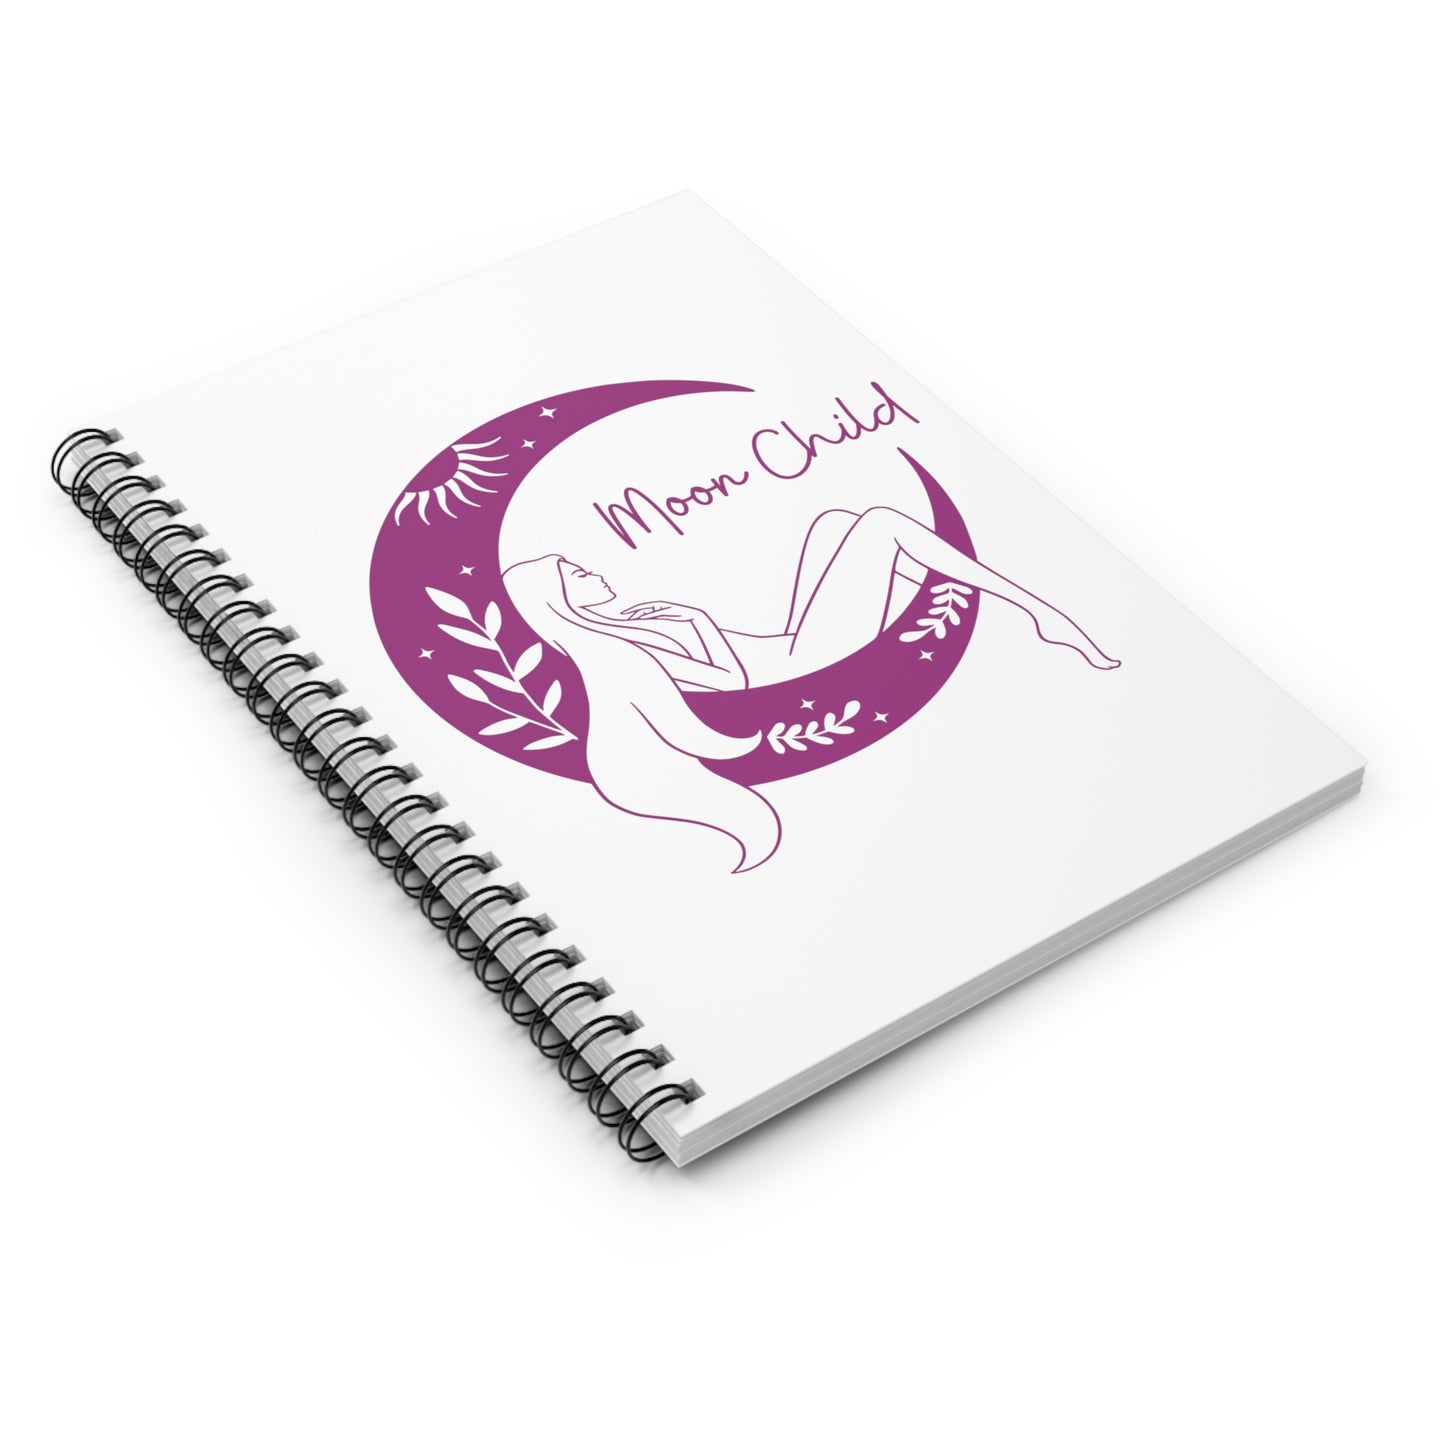 Moon Child Spiral Notebook - Ruled Line